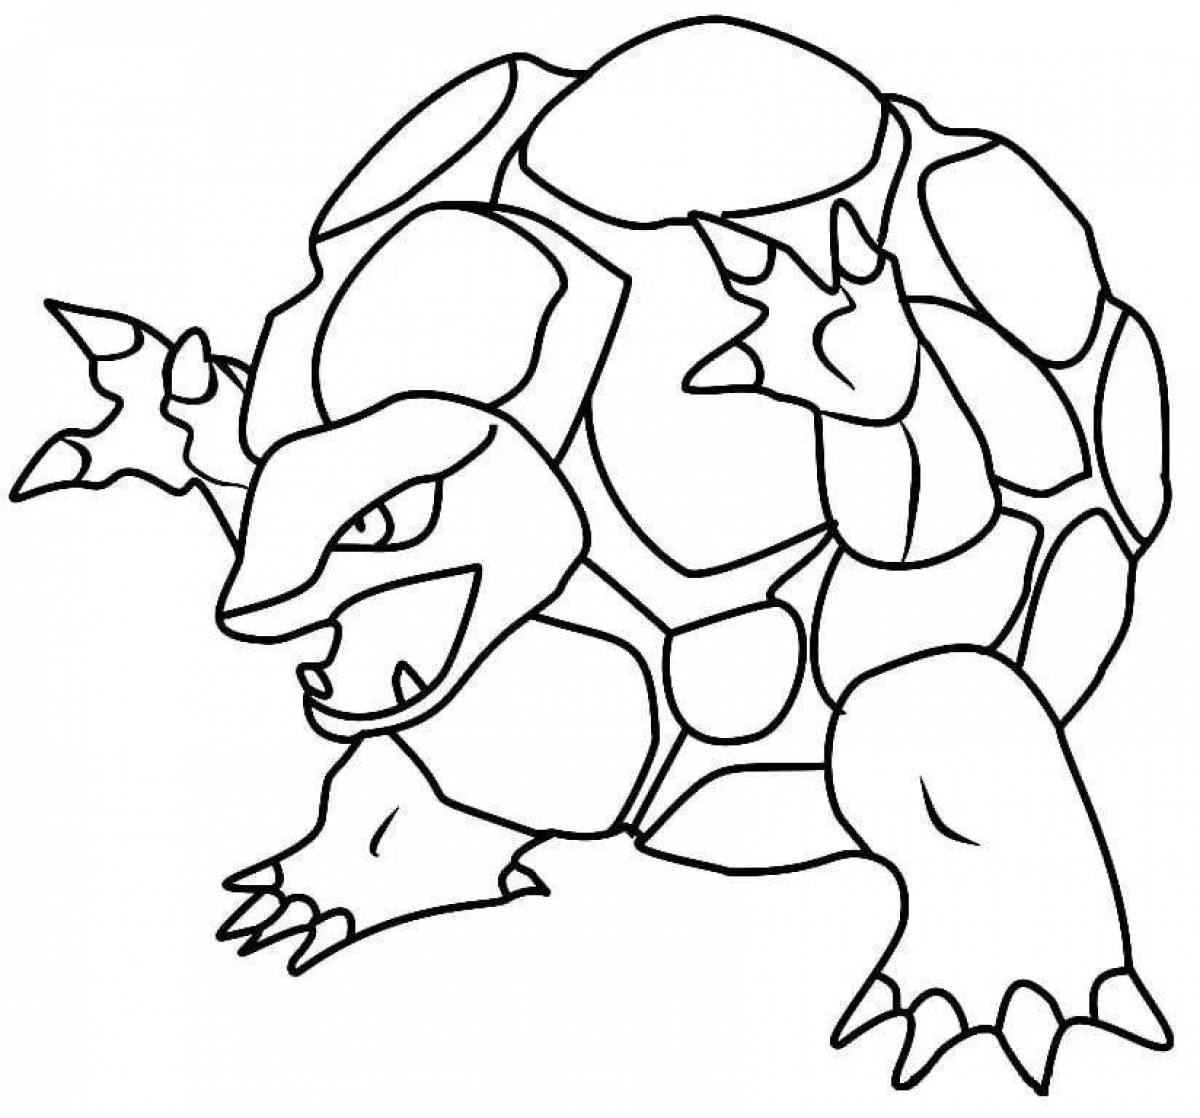 Great golem coloring page